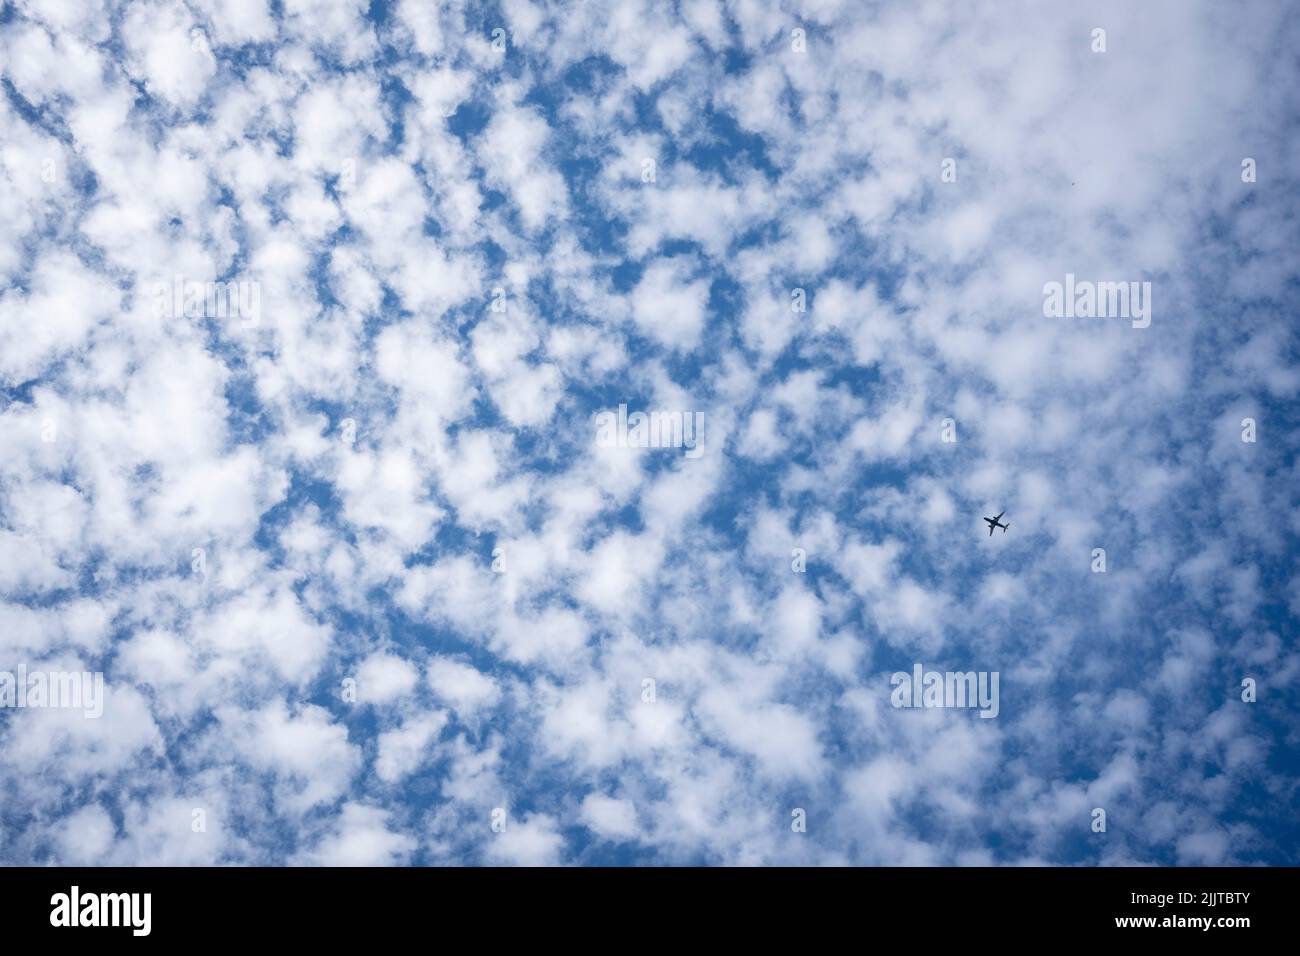 A single jet airliner flies across south London skies, its shape silhouetted against altocumulus cloud formations on its in-flight journey overhead, on 24th July 2022, in London, England. Altocumulus is a middle-altitude cloud whose altitude is between 2,000–7,000 m (7,000–23,000 ft). Stock Photo